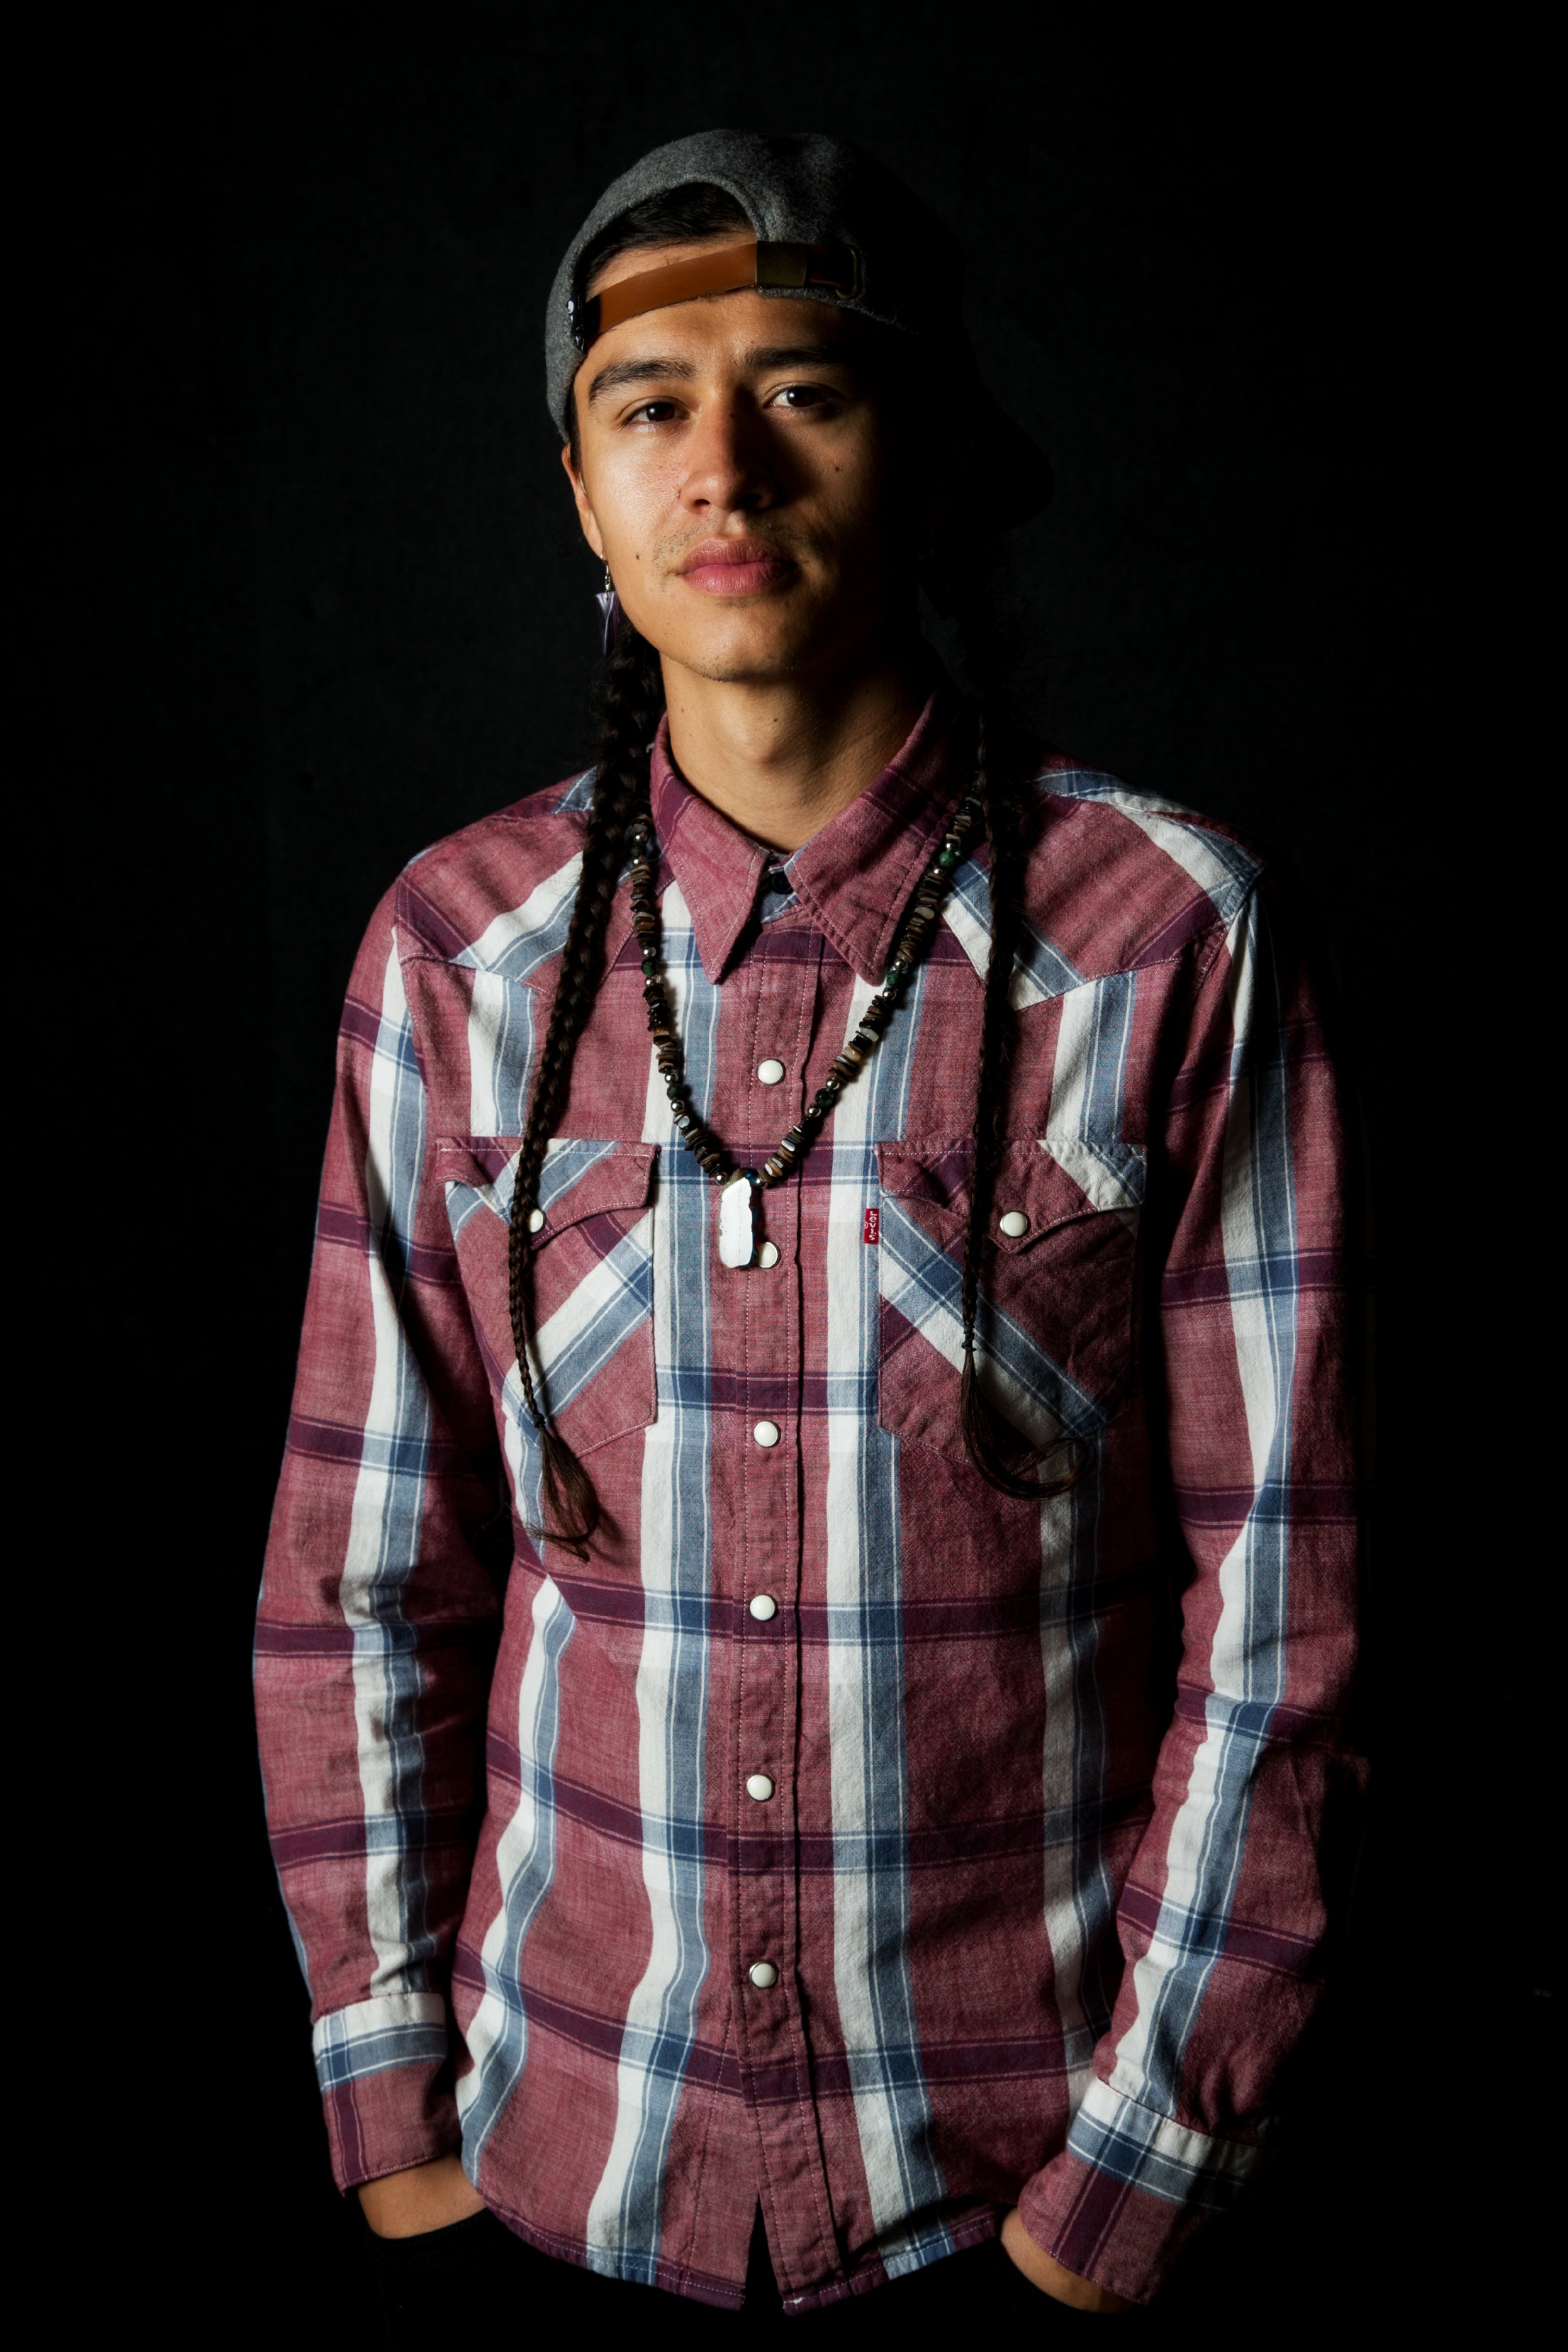 A young man with braids and a backwards baseball cap stands against a black backdrop wearing a plaid Levi's button-down shirt.